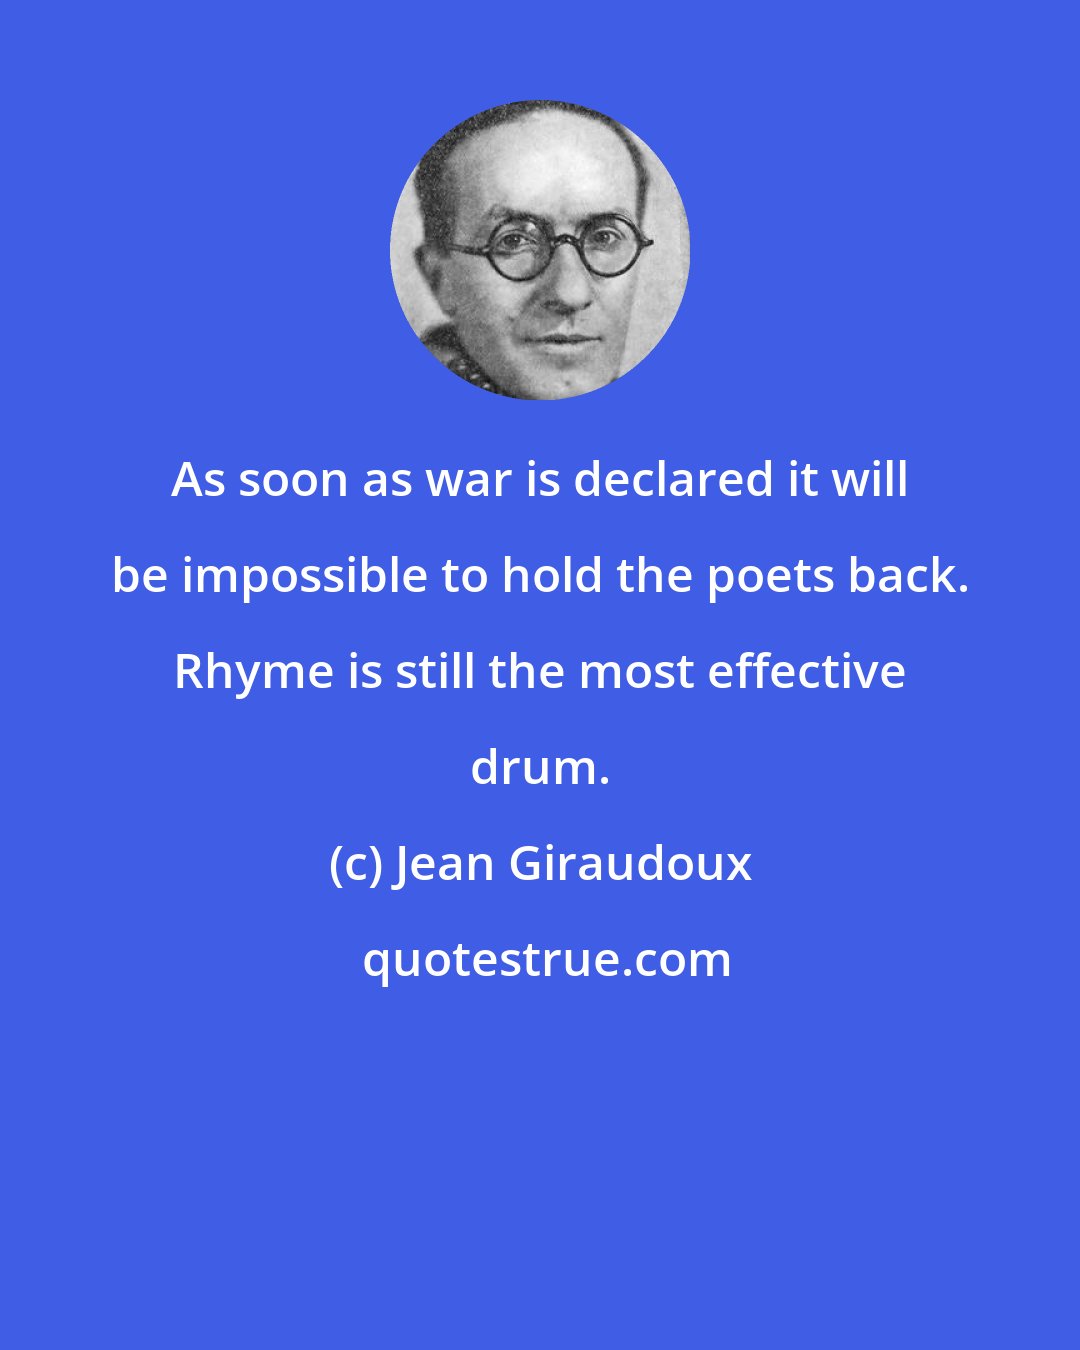 Jean Giraudoux: As soon as war is declared it will be impossible to hold the poets back. Rhyme is still the most effective drum.